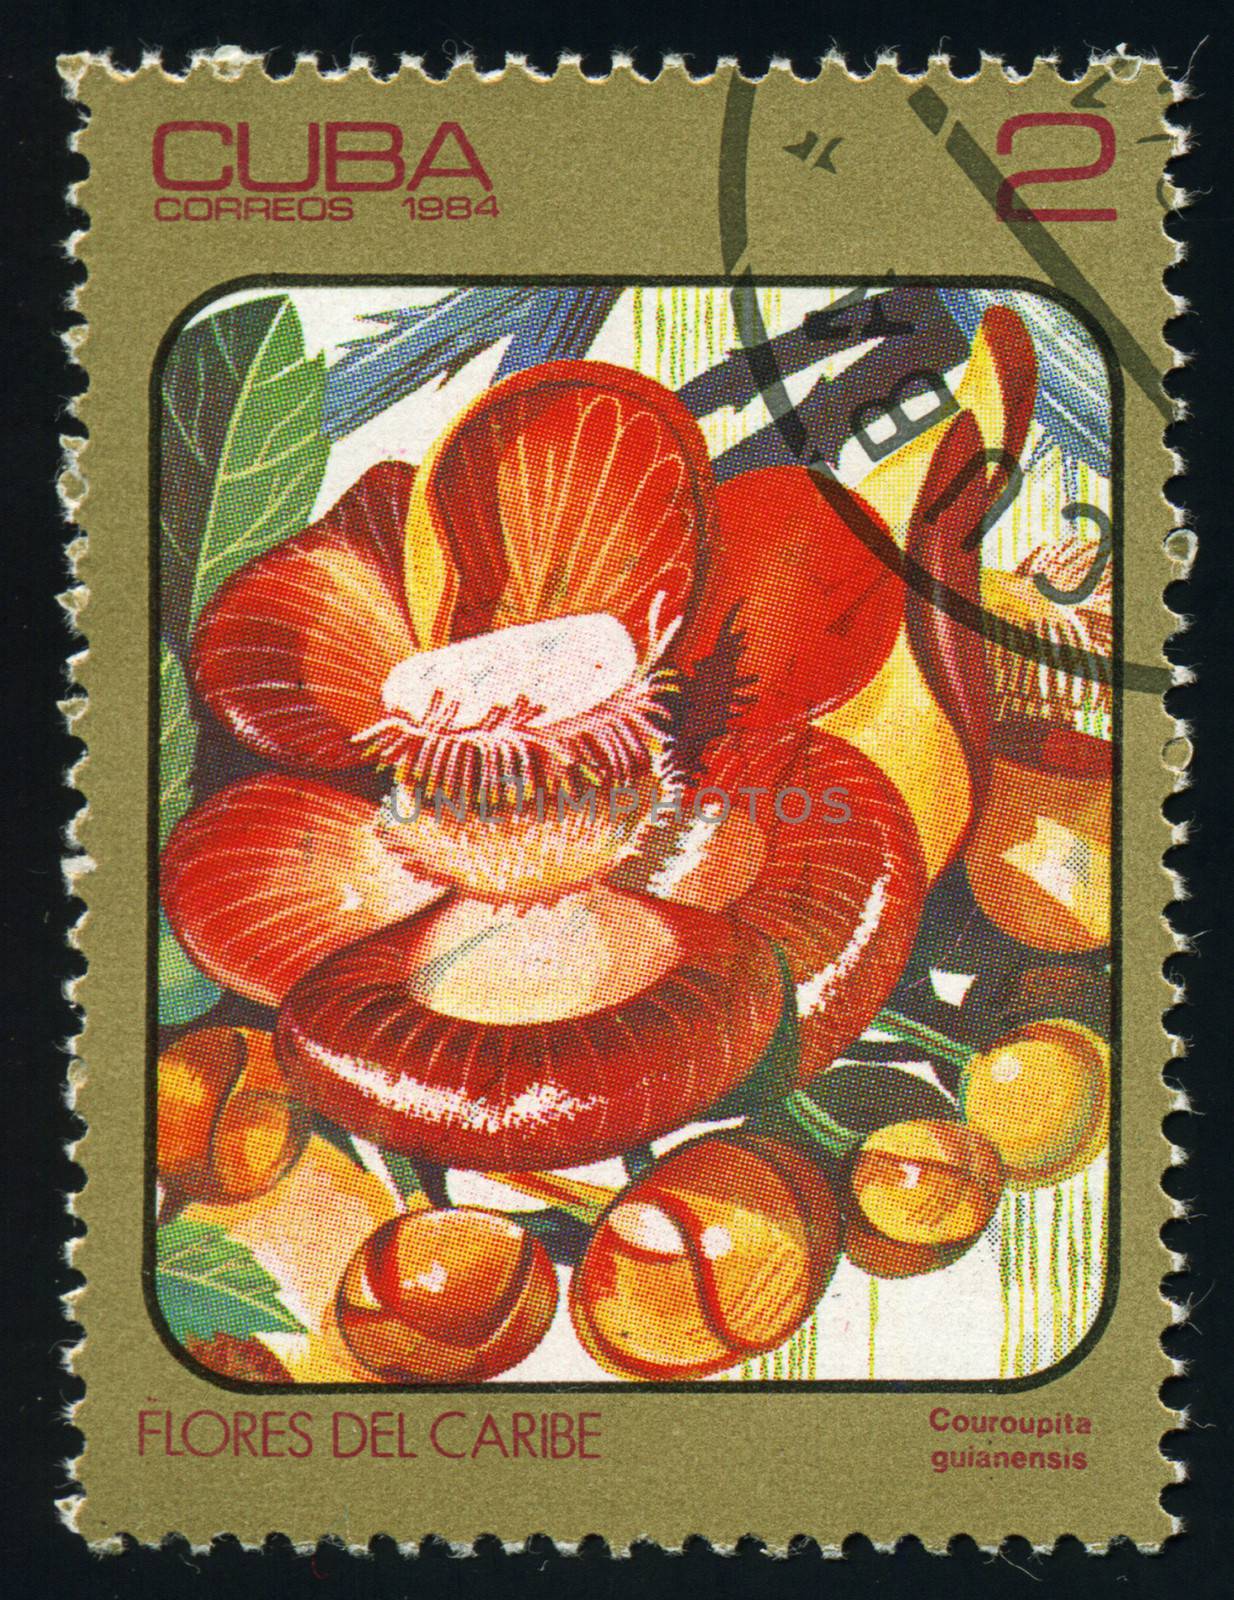 CUBA - CIRCA 1984: post stamp printed in Cuba shows image of couroupita guianensis (cannonball tree) from Caribbean flowers series, Scott catalog 2688 A730 2c, circa 1984 by Zhukow